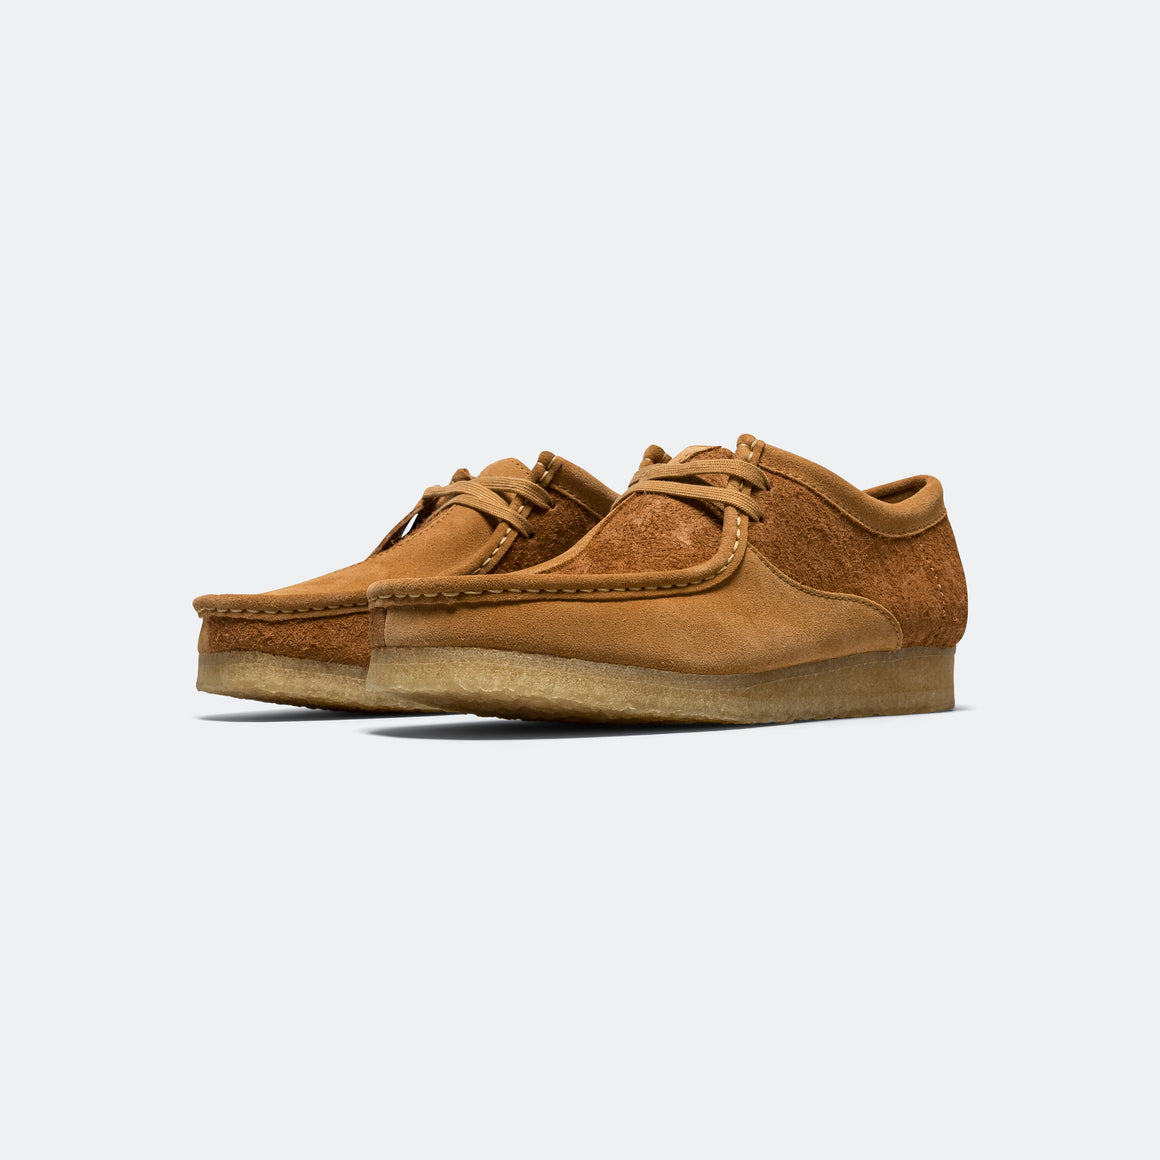 Clarks - Wallabee - Tan Combi - UP THERE